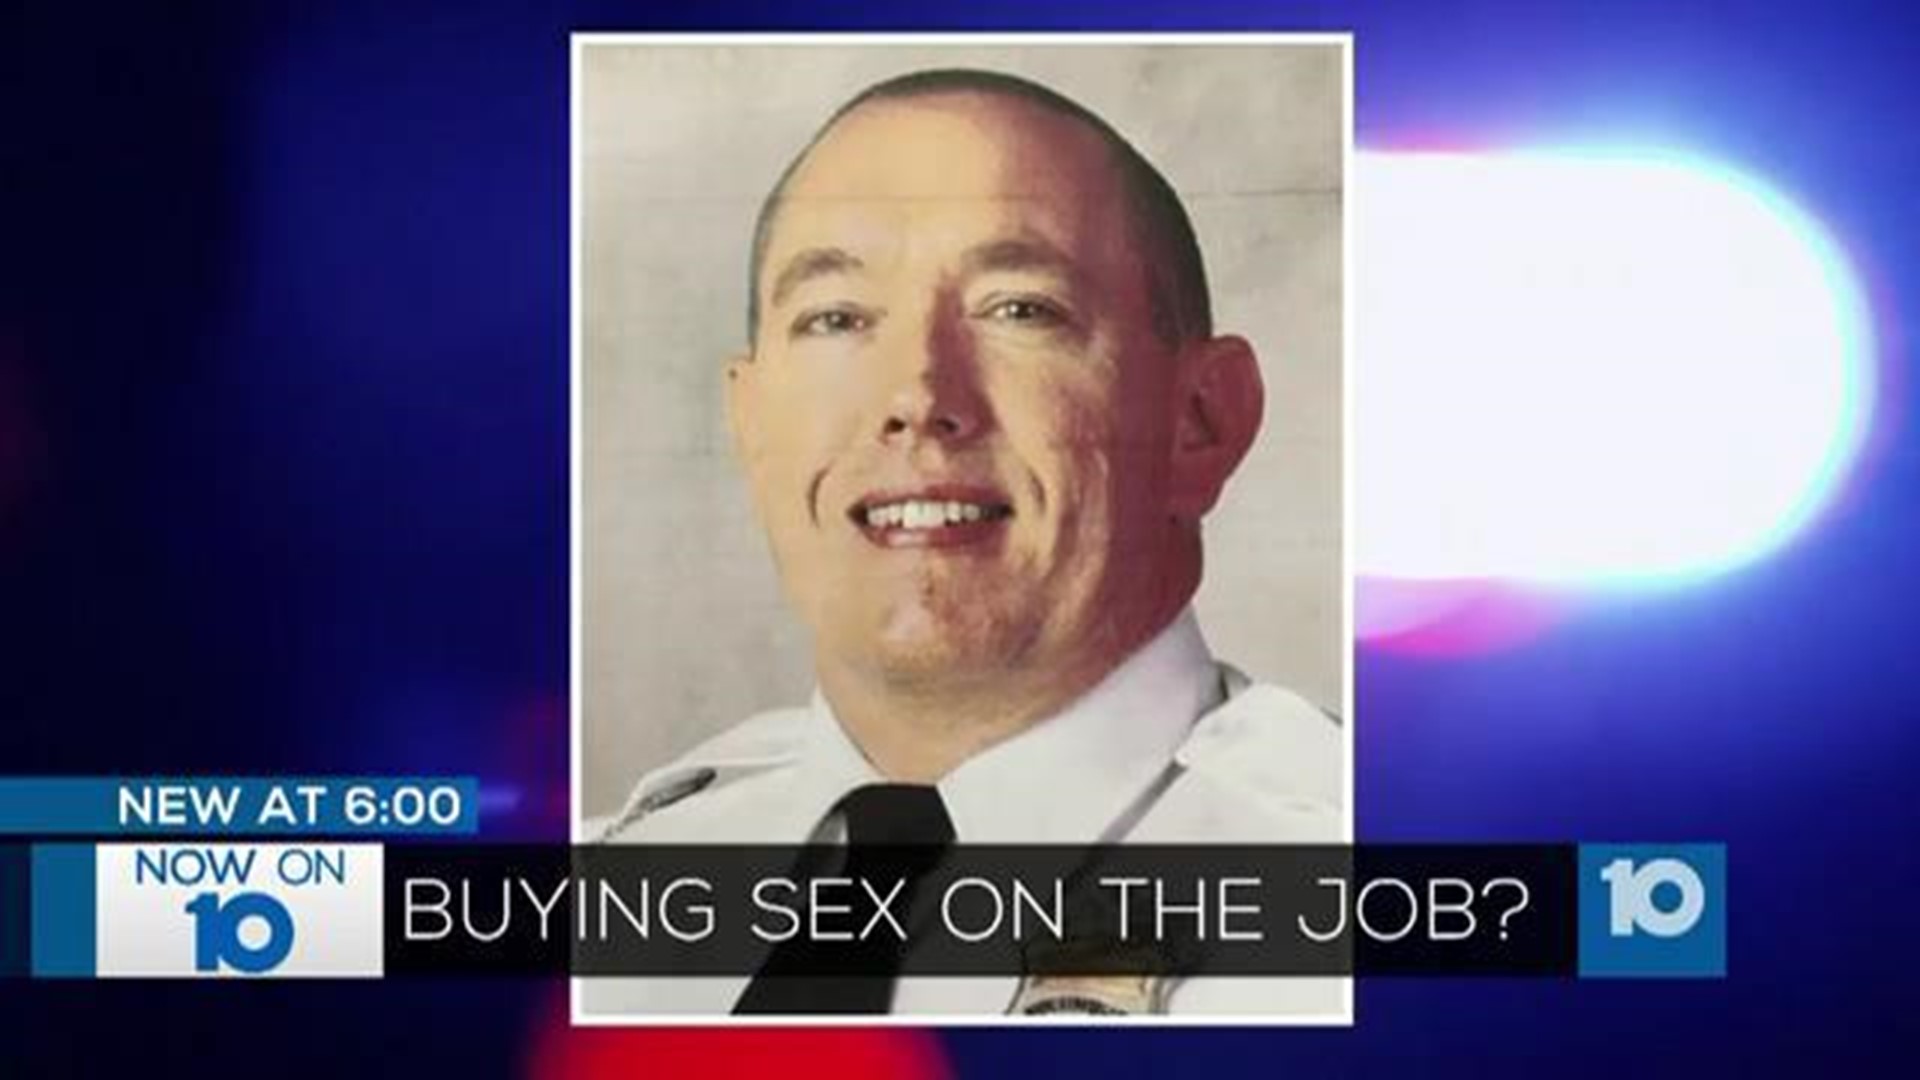 Cop Buying Sex On The Job Internal Affairs Finds Officer Guilty Of Misconduct